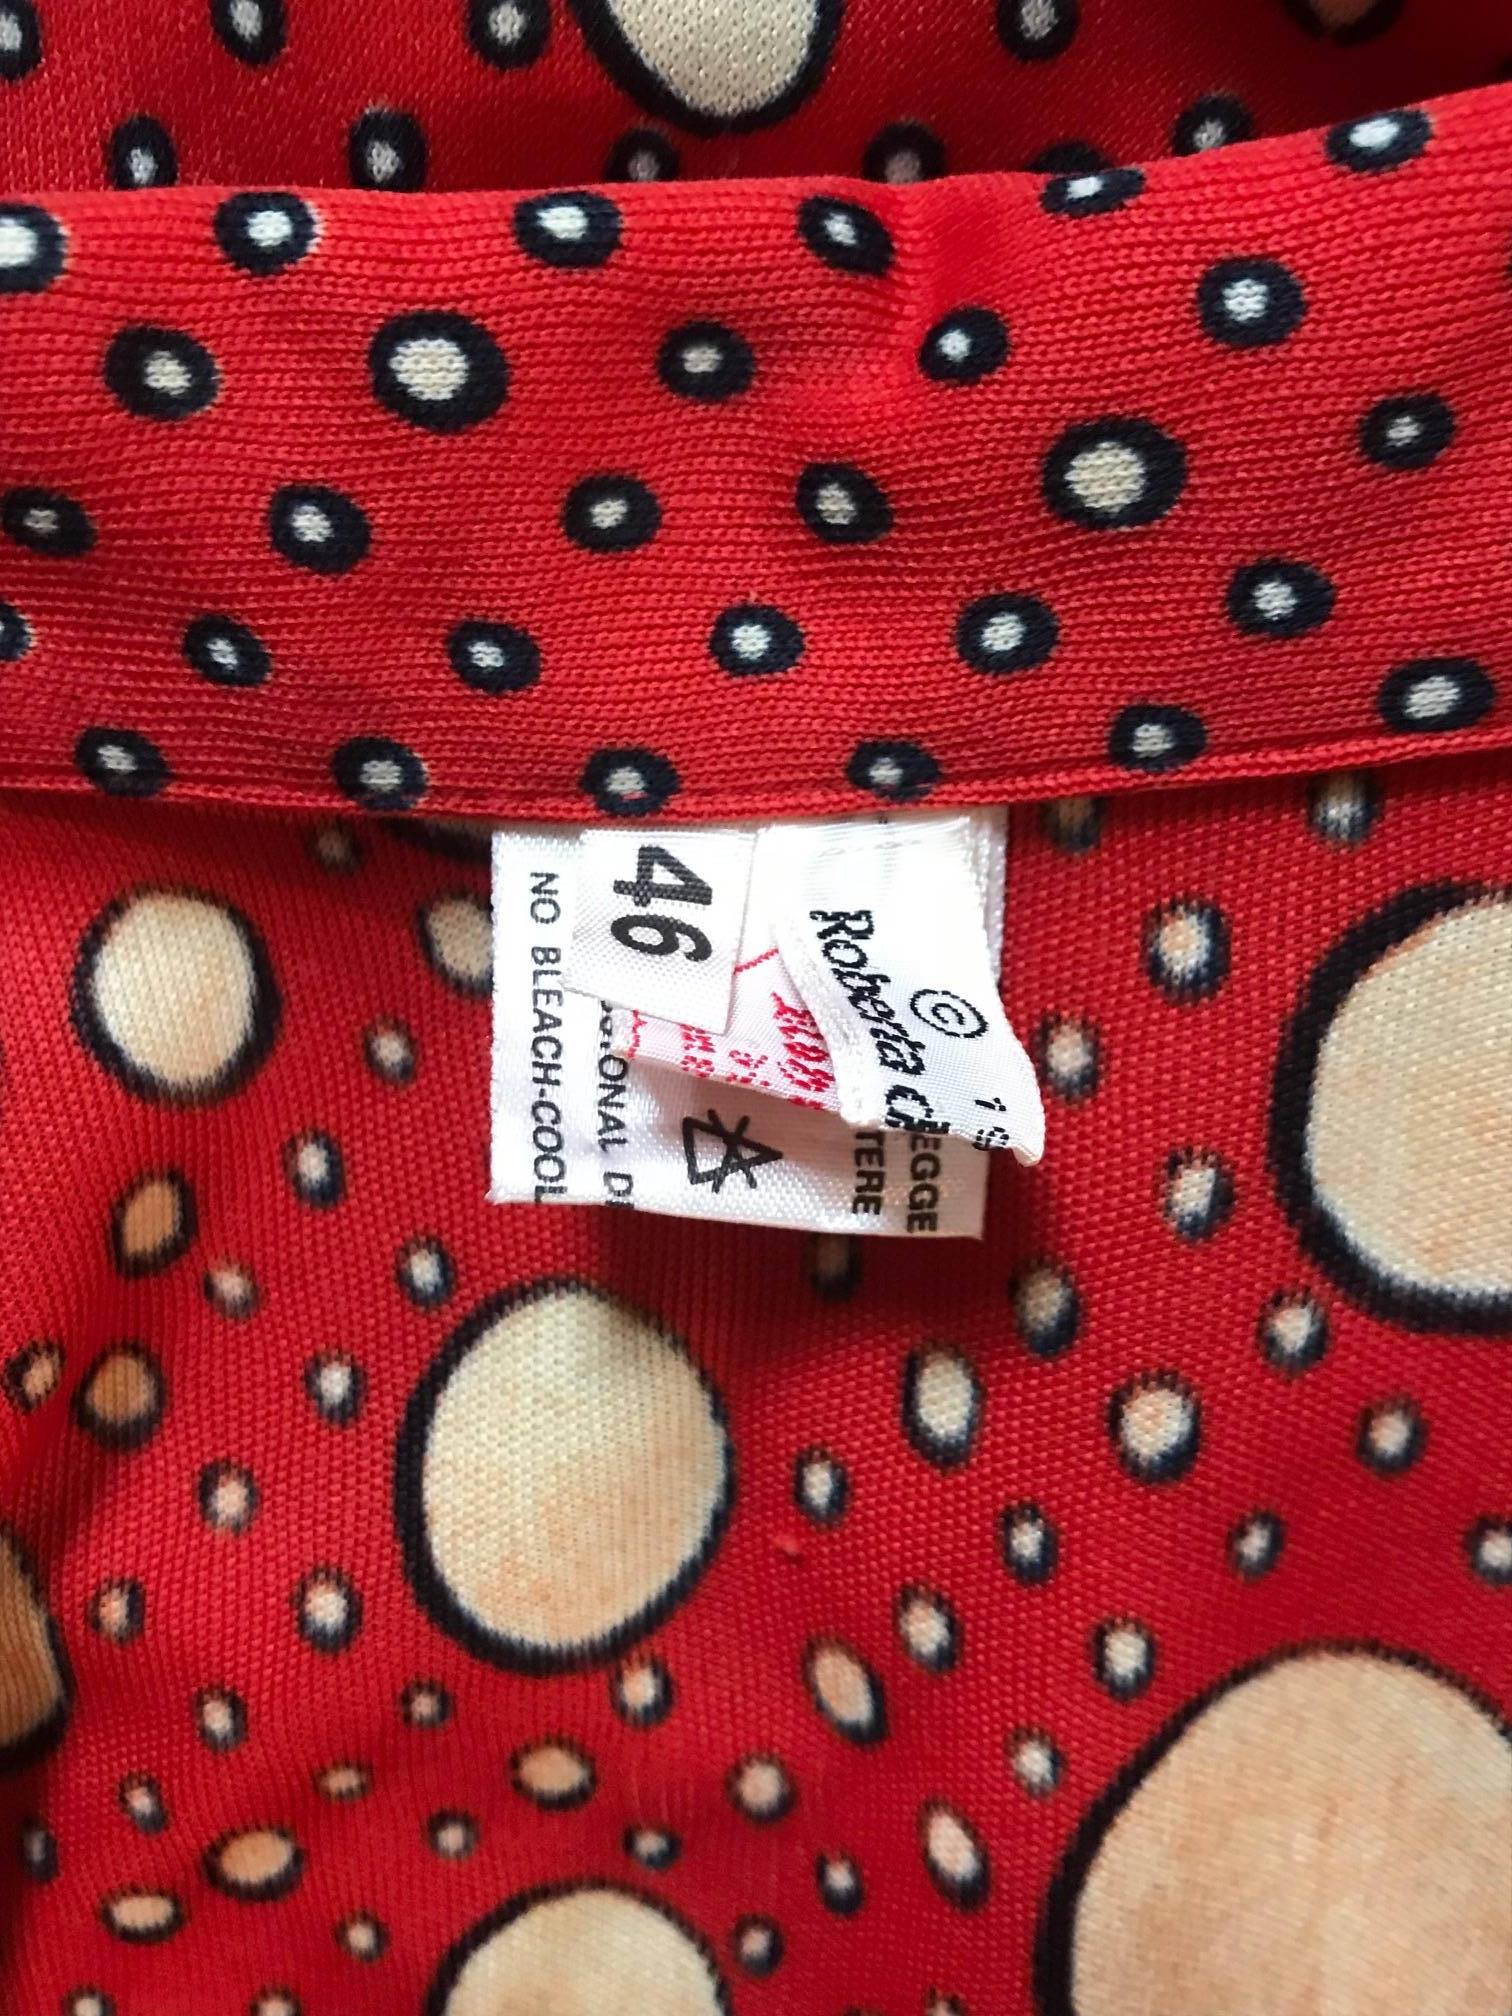 Roberta di Camerino Red and Cream Polka Dot Shirt Dress, 1970s   In Excellent Condition For Sale In San Francisco, CA